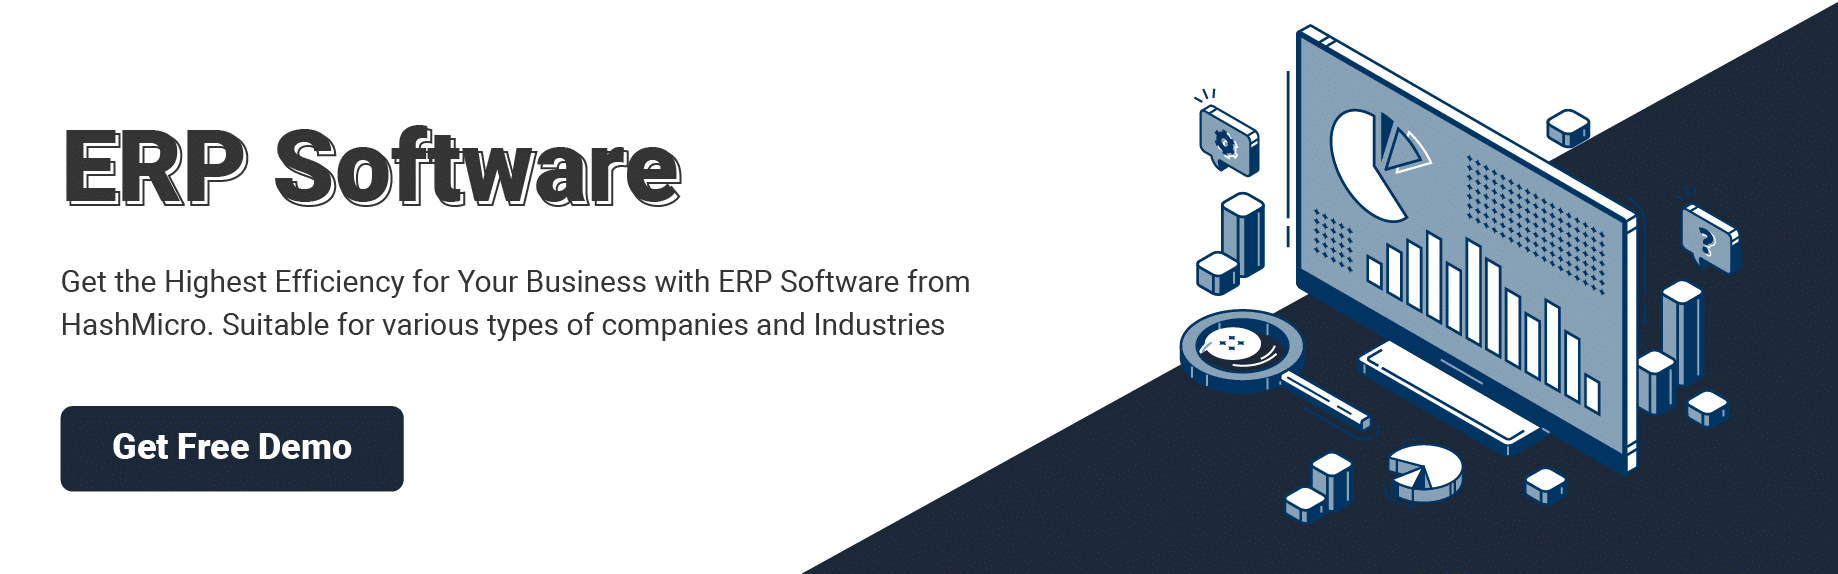 Erp System Modules (https://www.hashmicro.com/erp-system)